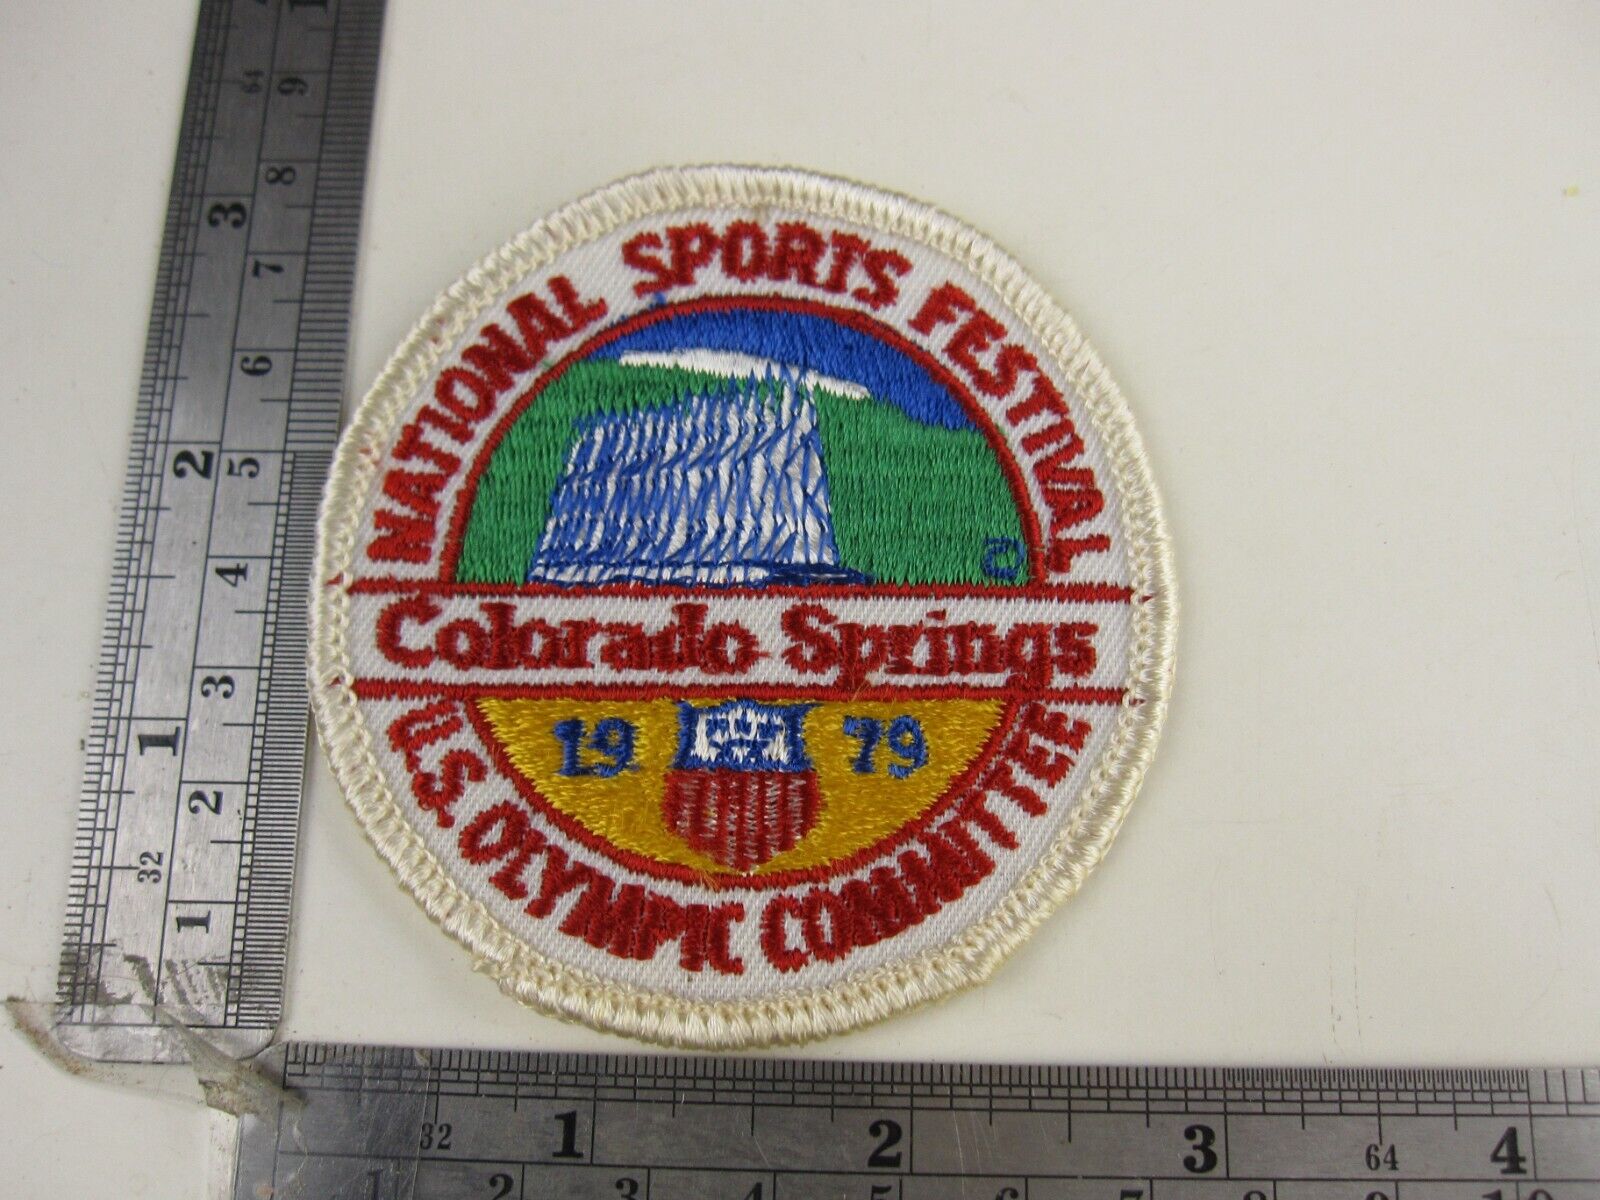 1979 U.S. Olympic Committee Colorado Springs National Sports Festival Patch  BIS